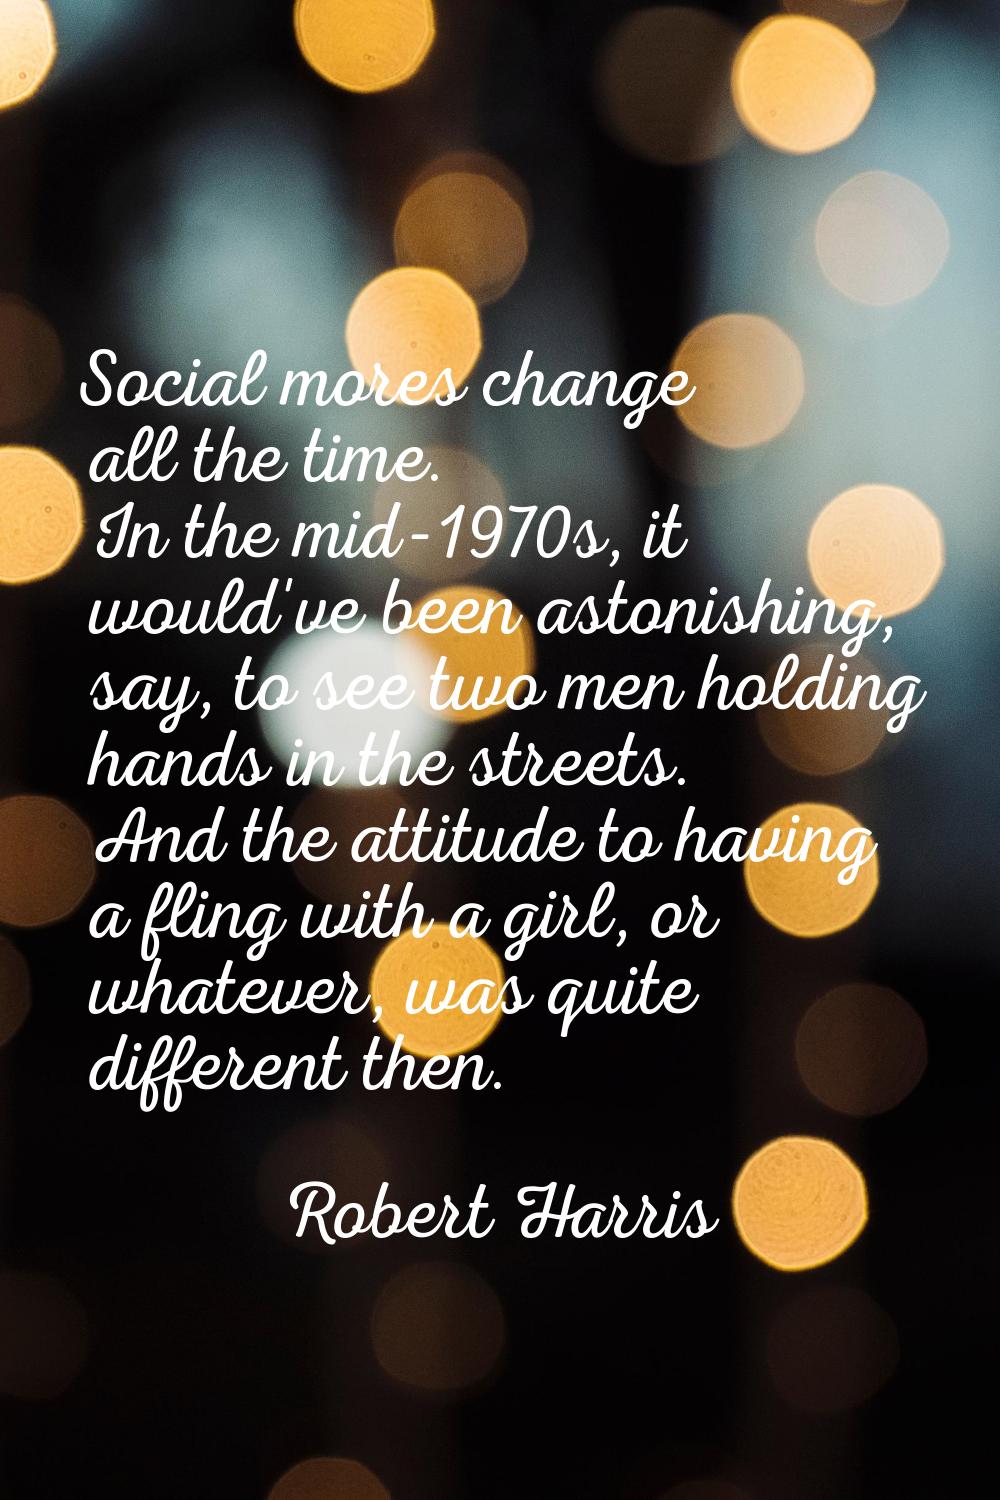 Social mores change all the time. In the mid-1970s, it would've been astonishing, say, to see two m